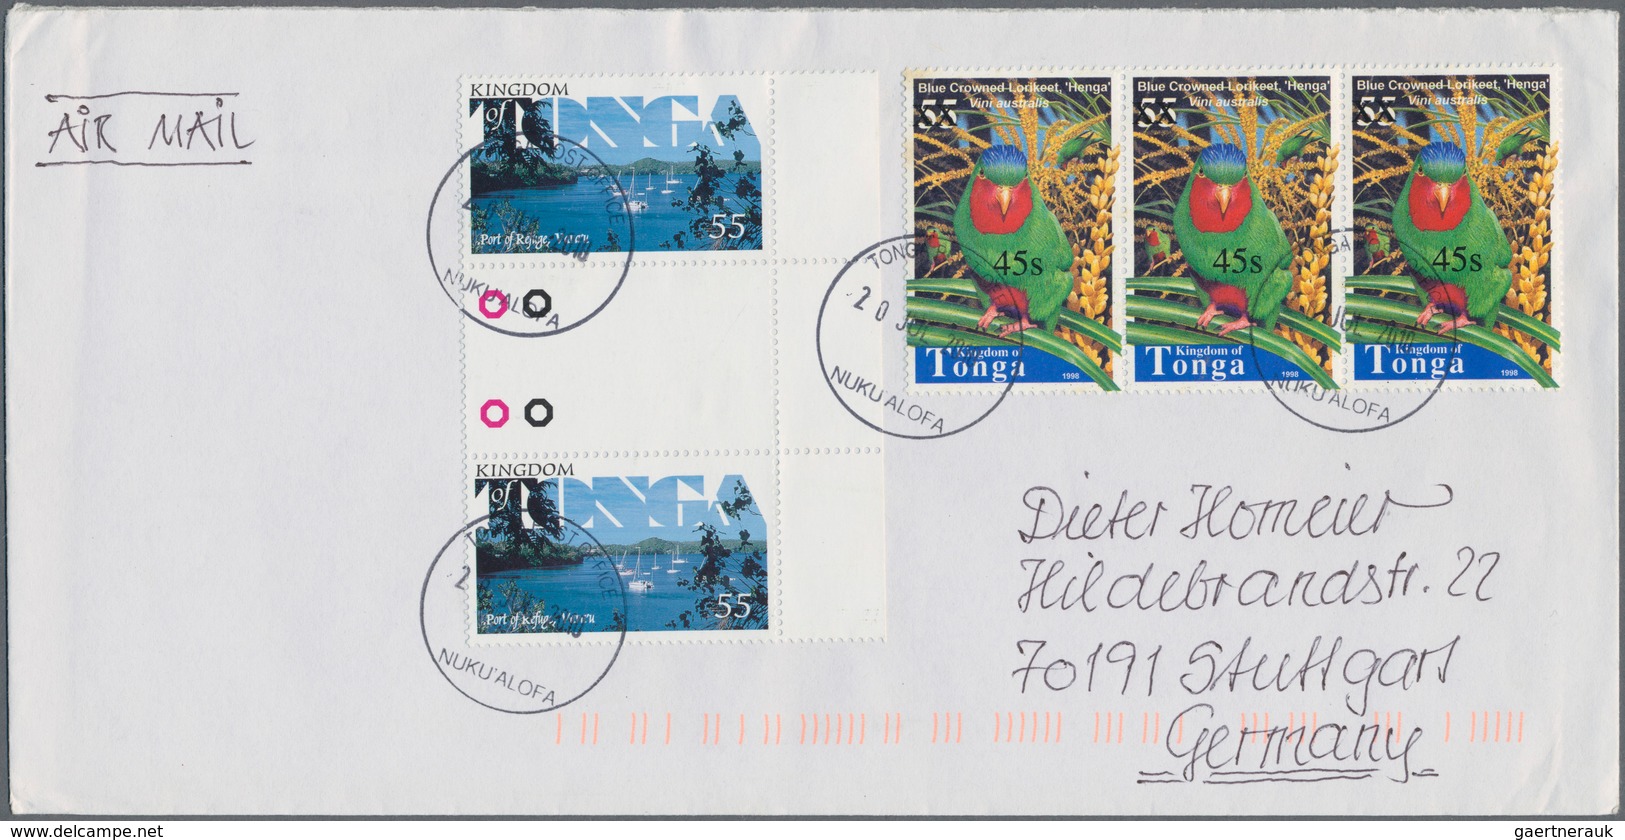 Tonga: 2010, seven covers with the scarce overprinted stamps, all sent to Germany. With attractive t